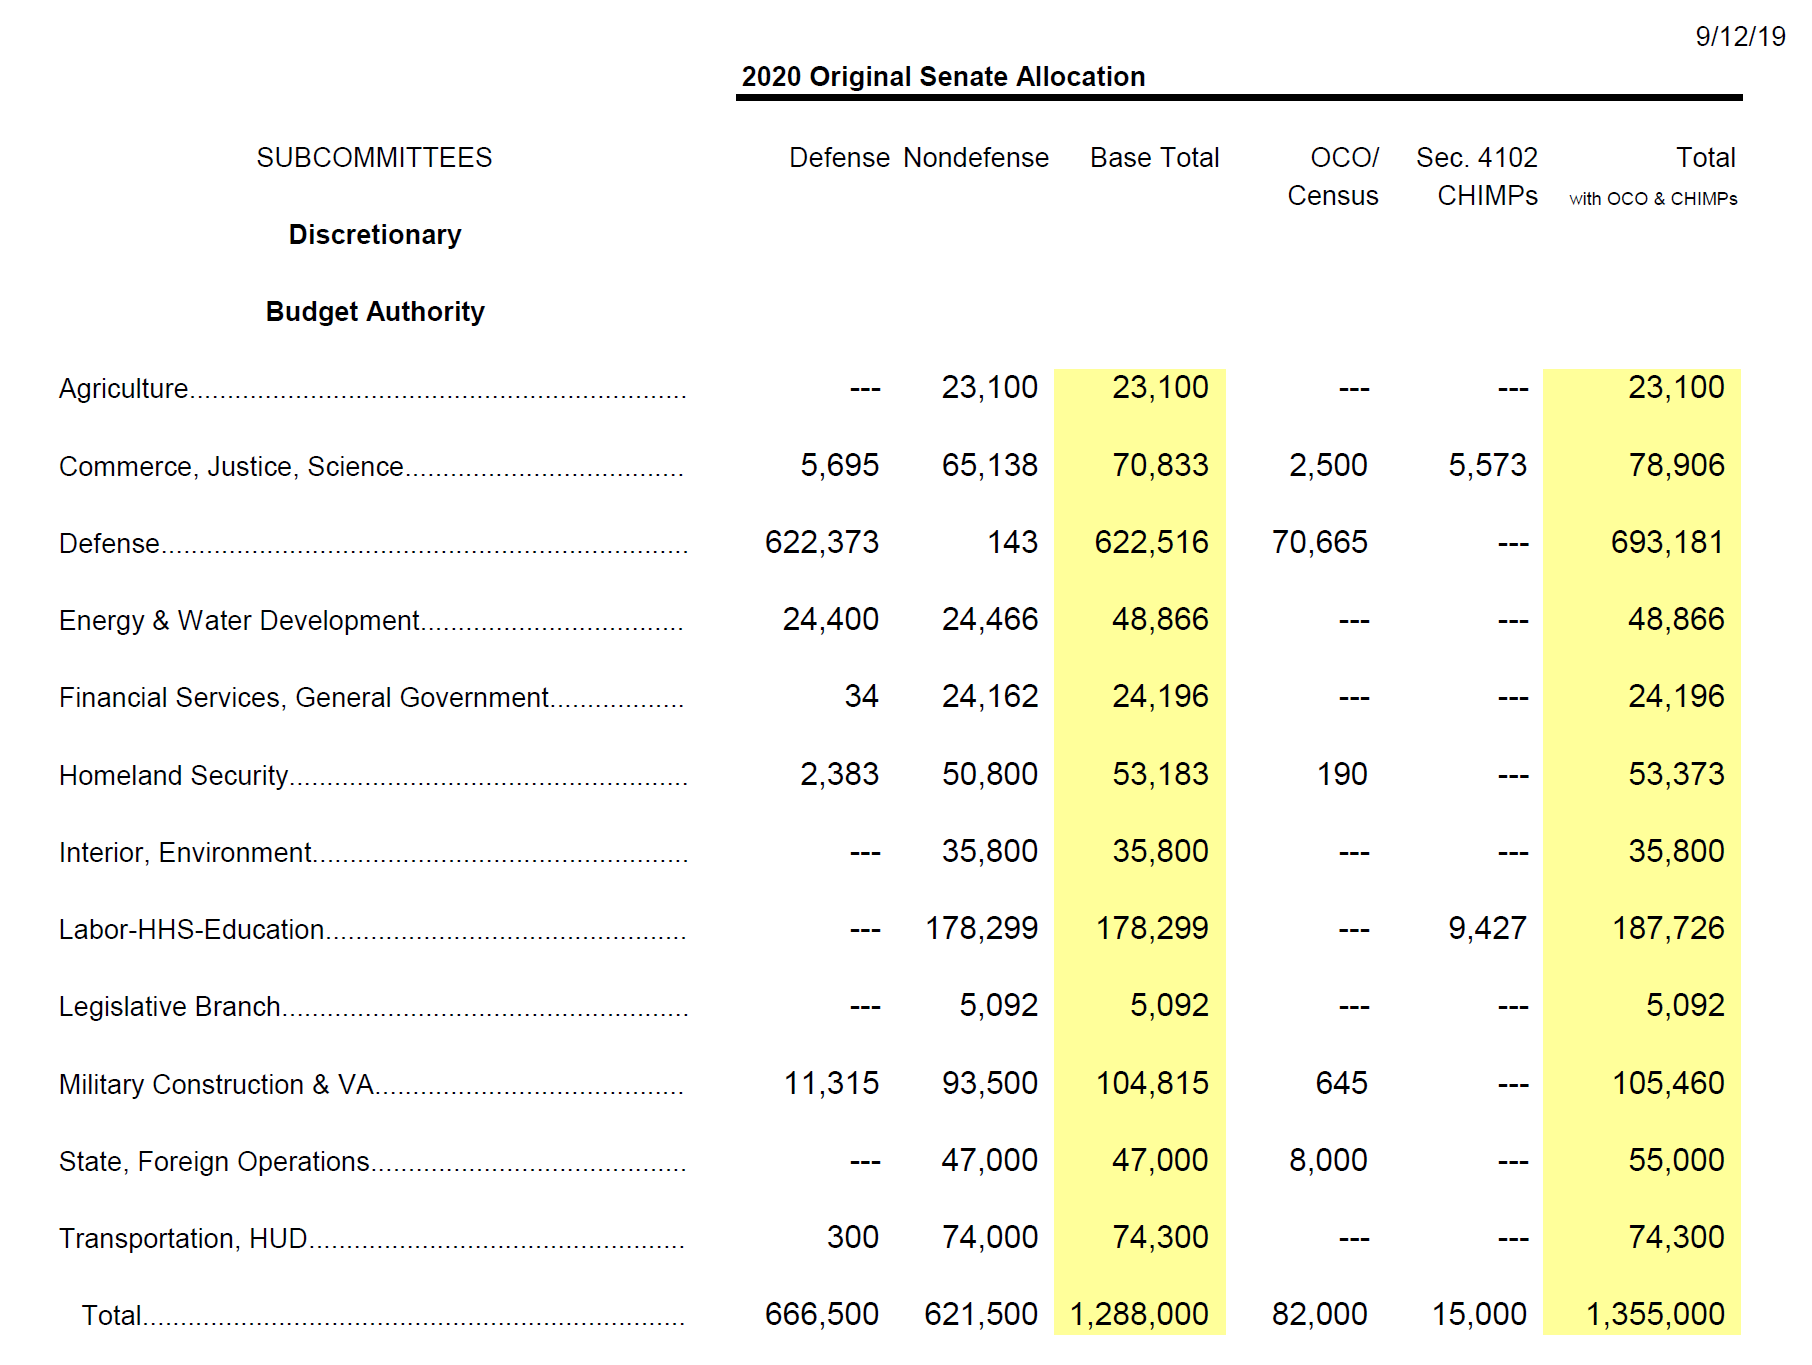 FY2020 302(b) Subcommittee Allocations